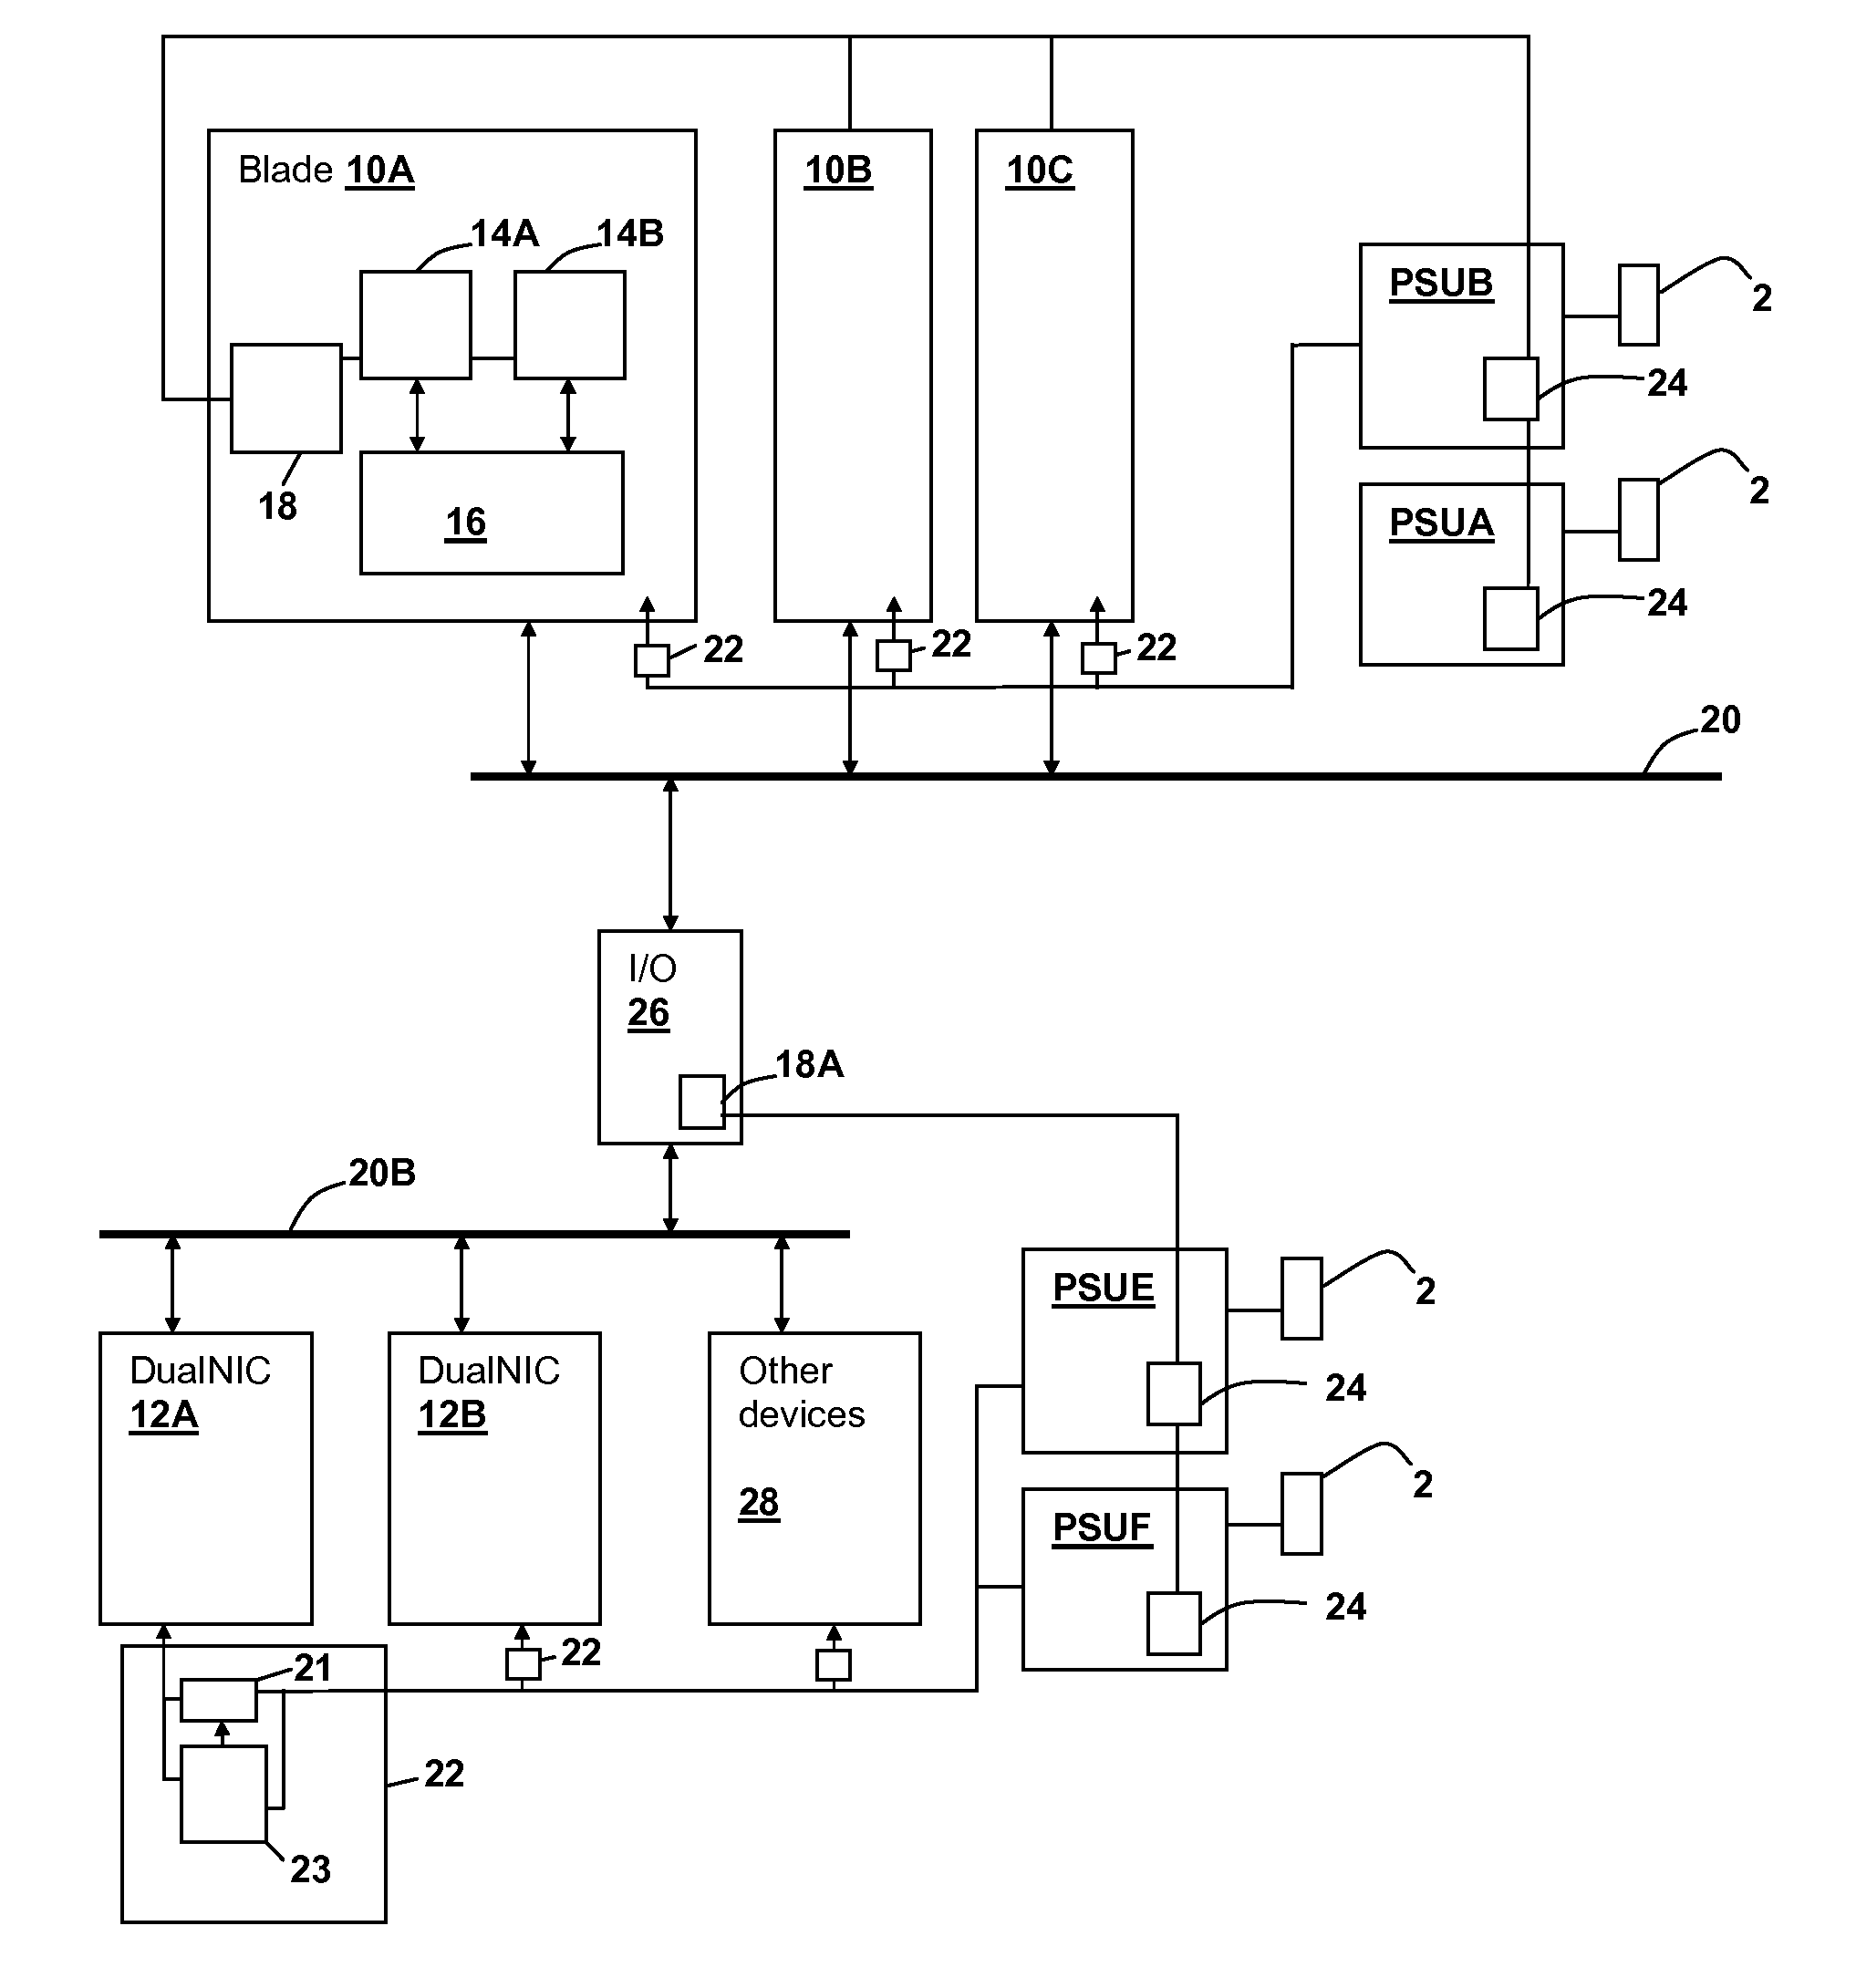 Power bus current bounding using local current-limiting soft-switches and device requirements information